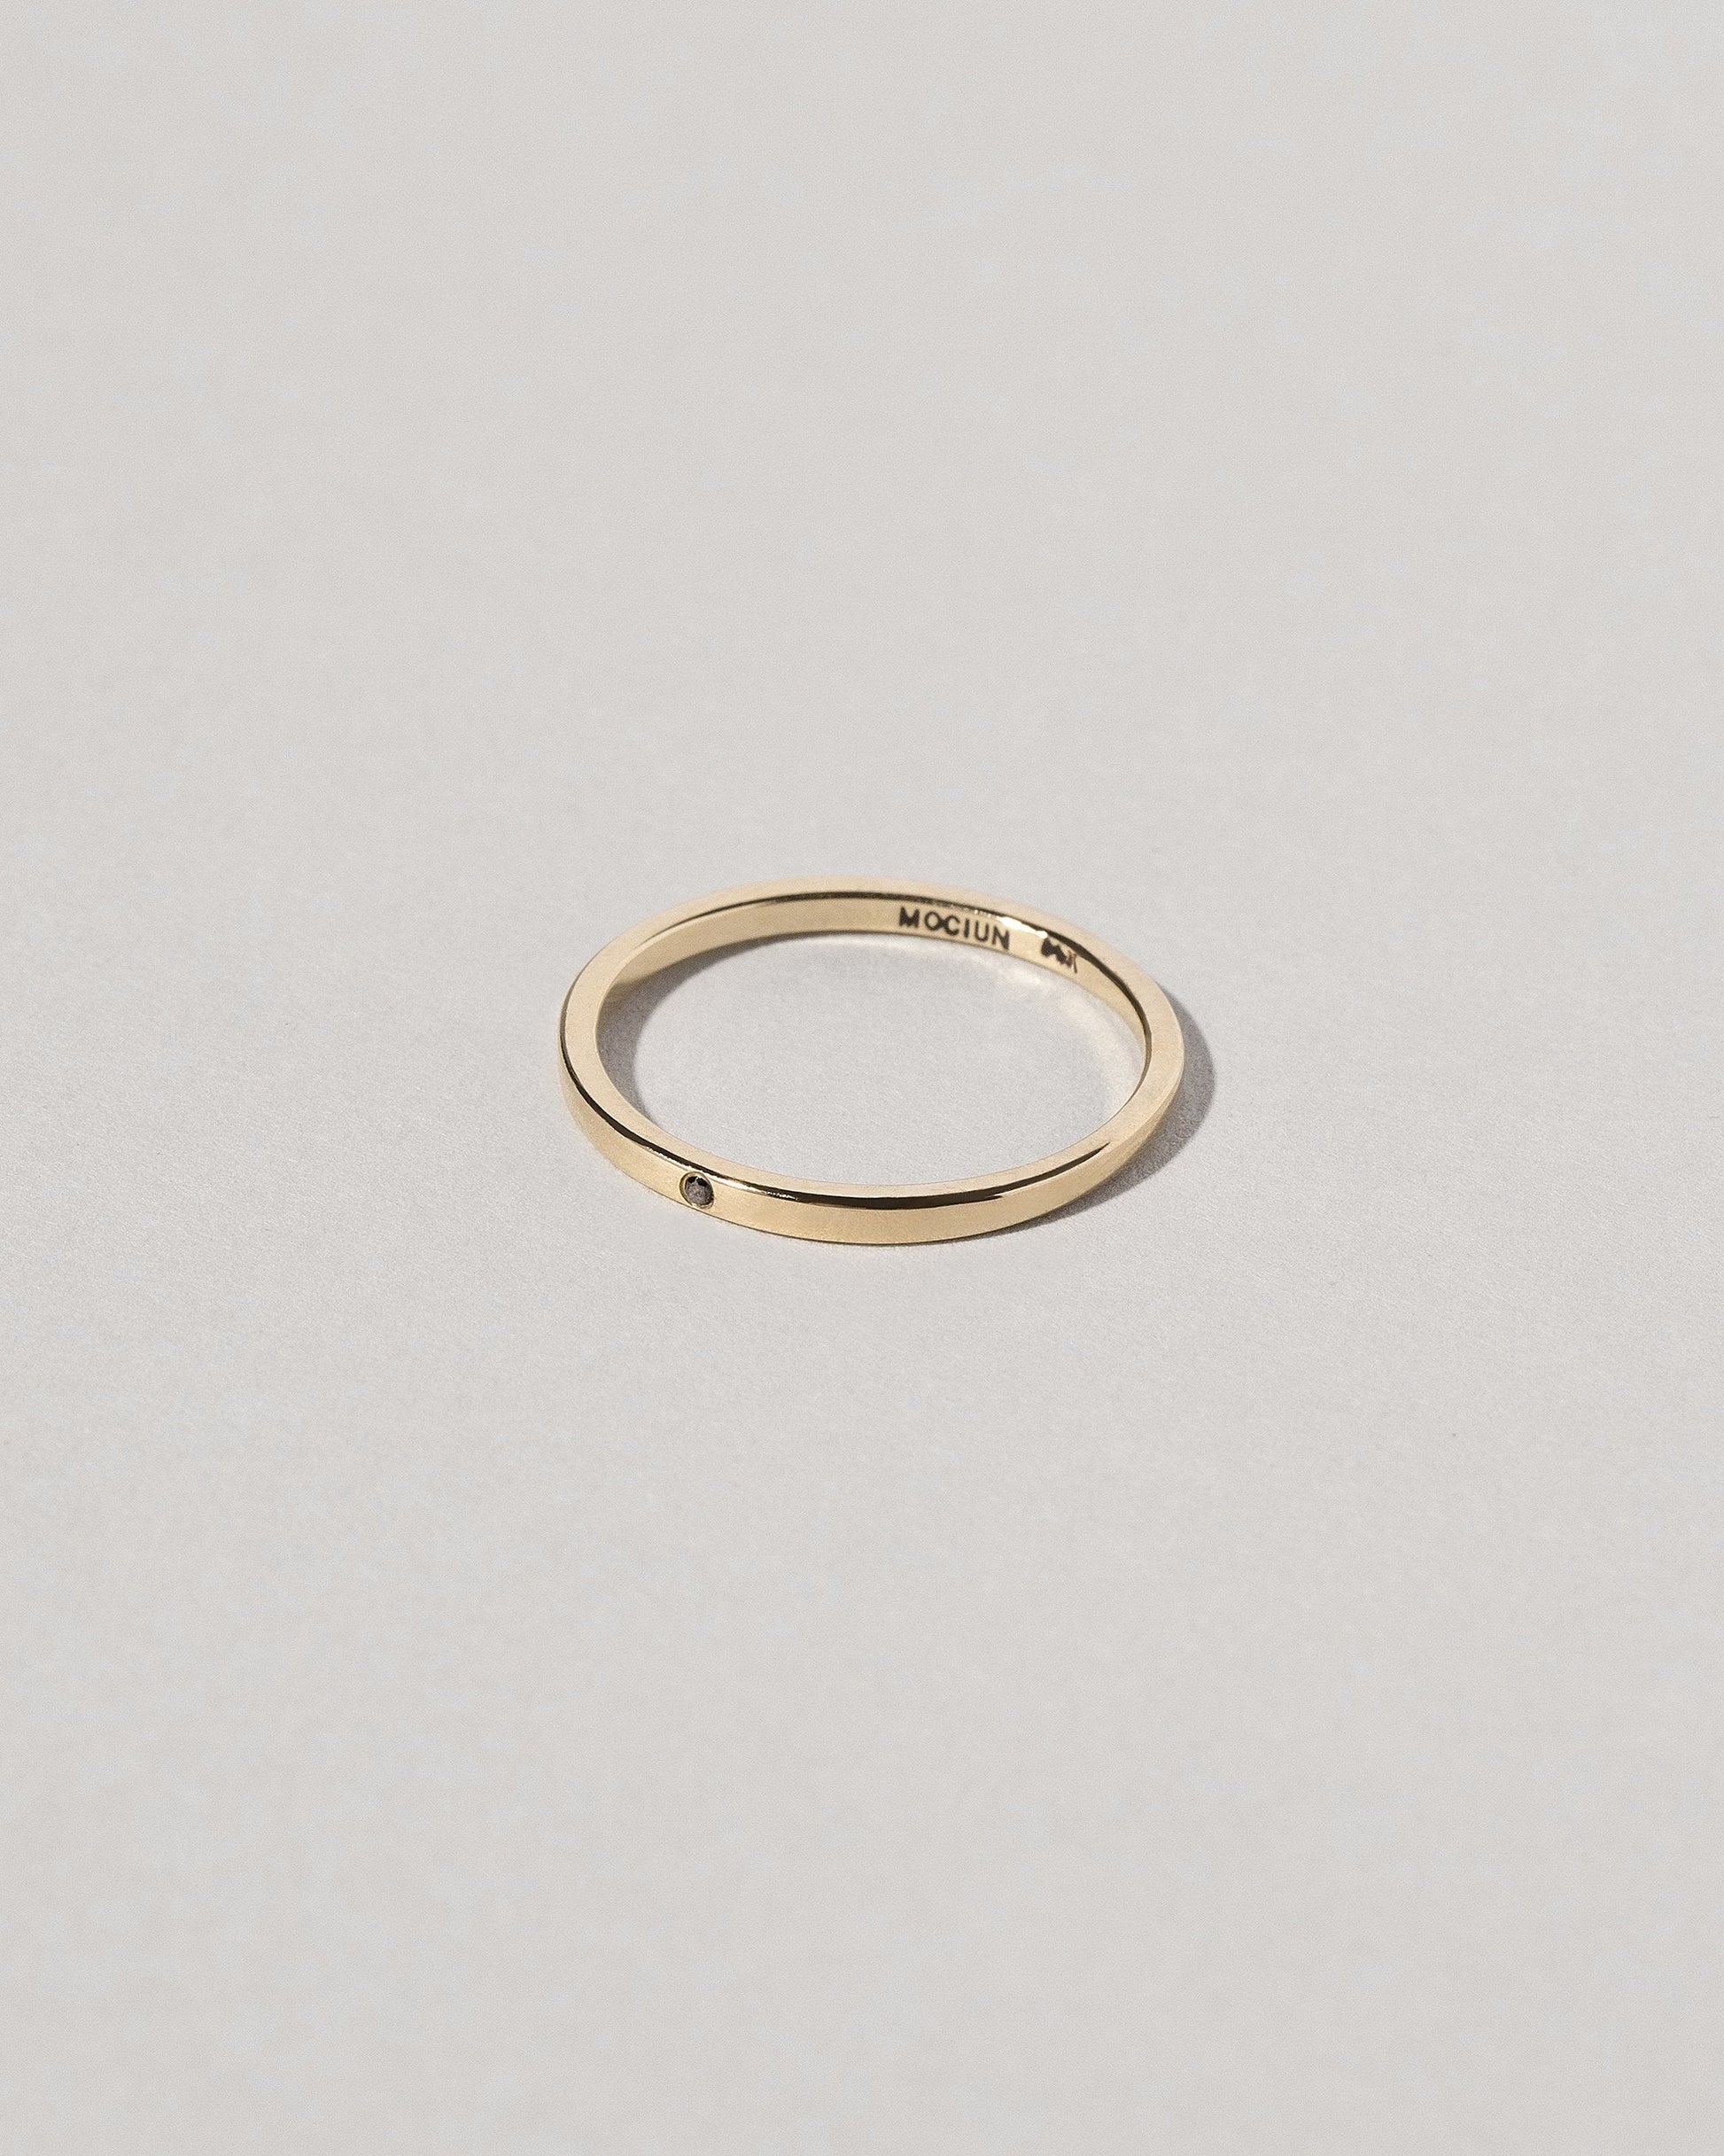 View from the side of the Gold 1.5mm Square Wire Band with Single Stone Black Diamond 1.3mm on light color background.